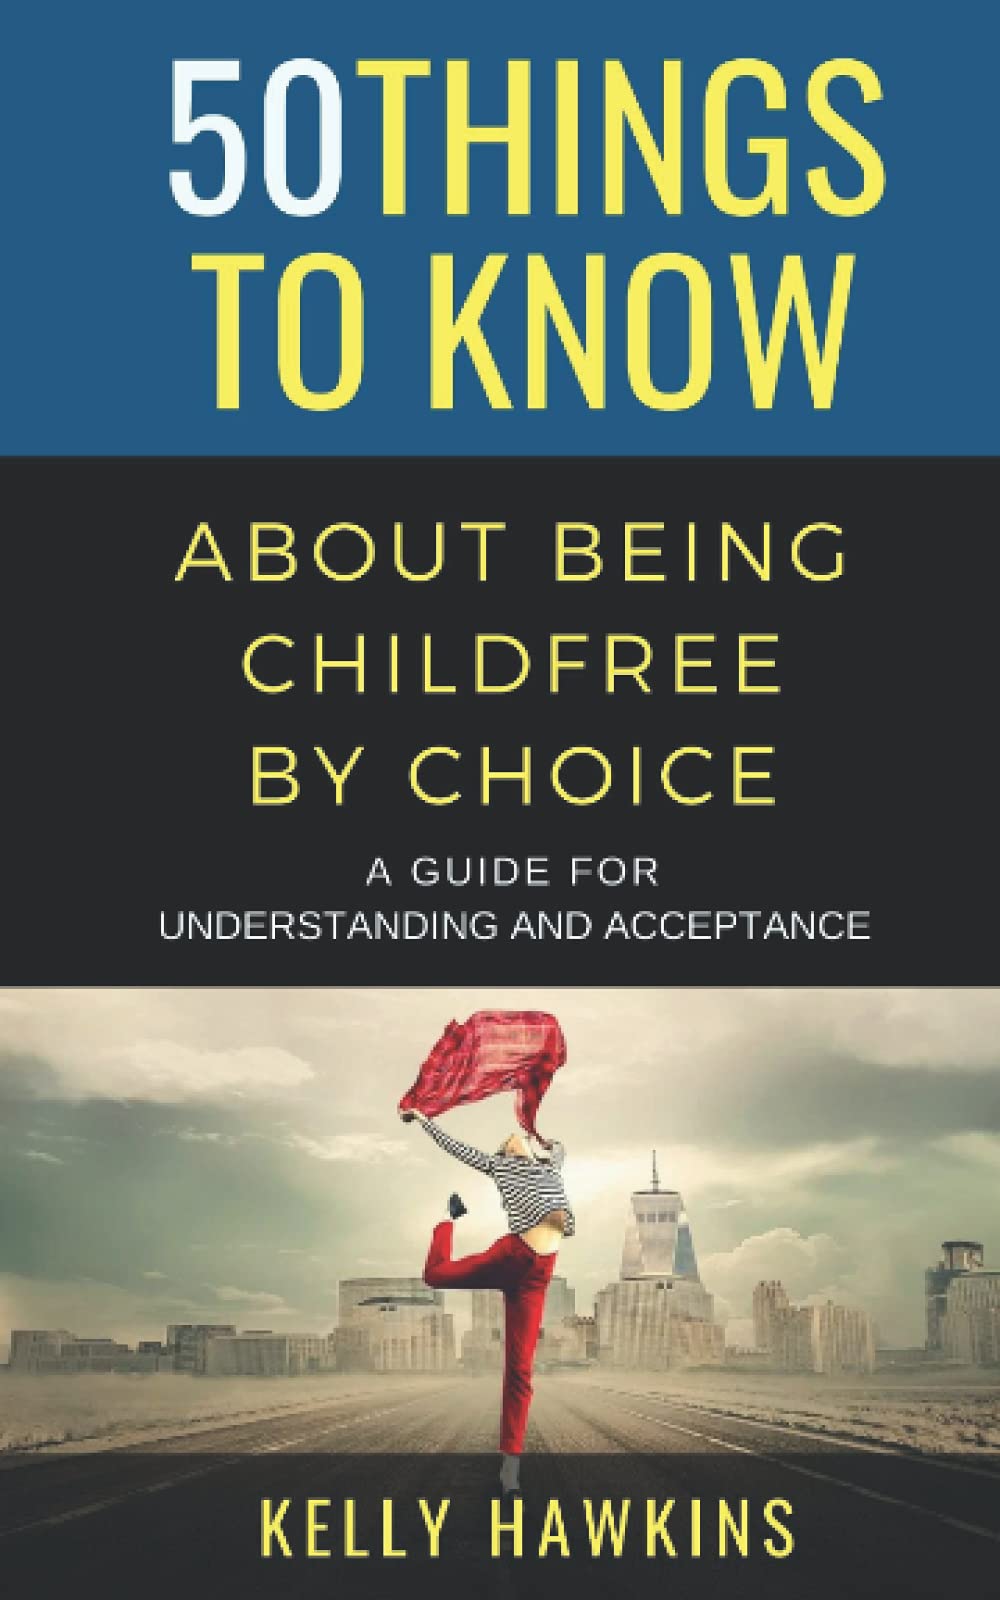 50 Things to Know About Being Childfree by Choice: A Guide for Understanding and Acceptance, by Kelly Hawkins